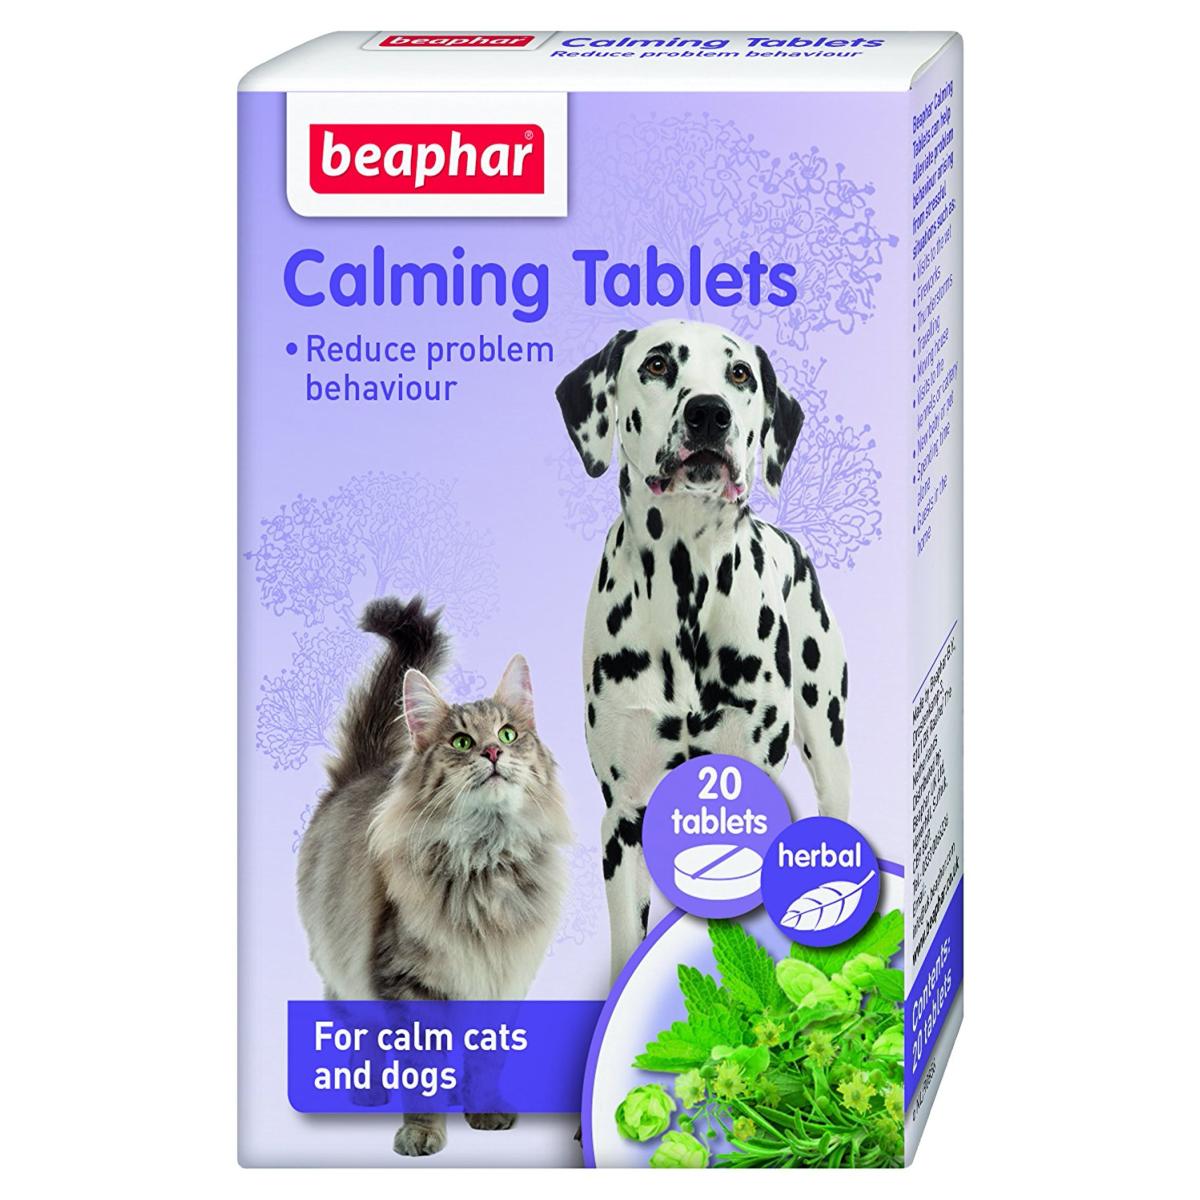 Beaphar | Natural Herbal Calming | Cat & Dog Anxiety Tablets